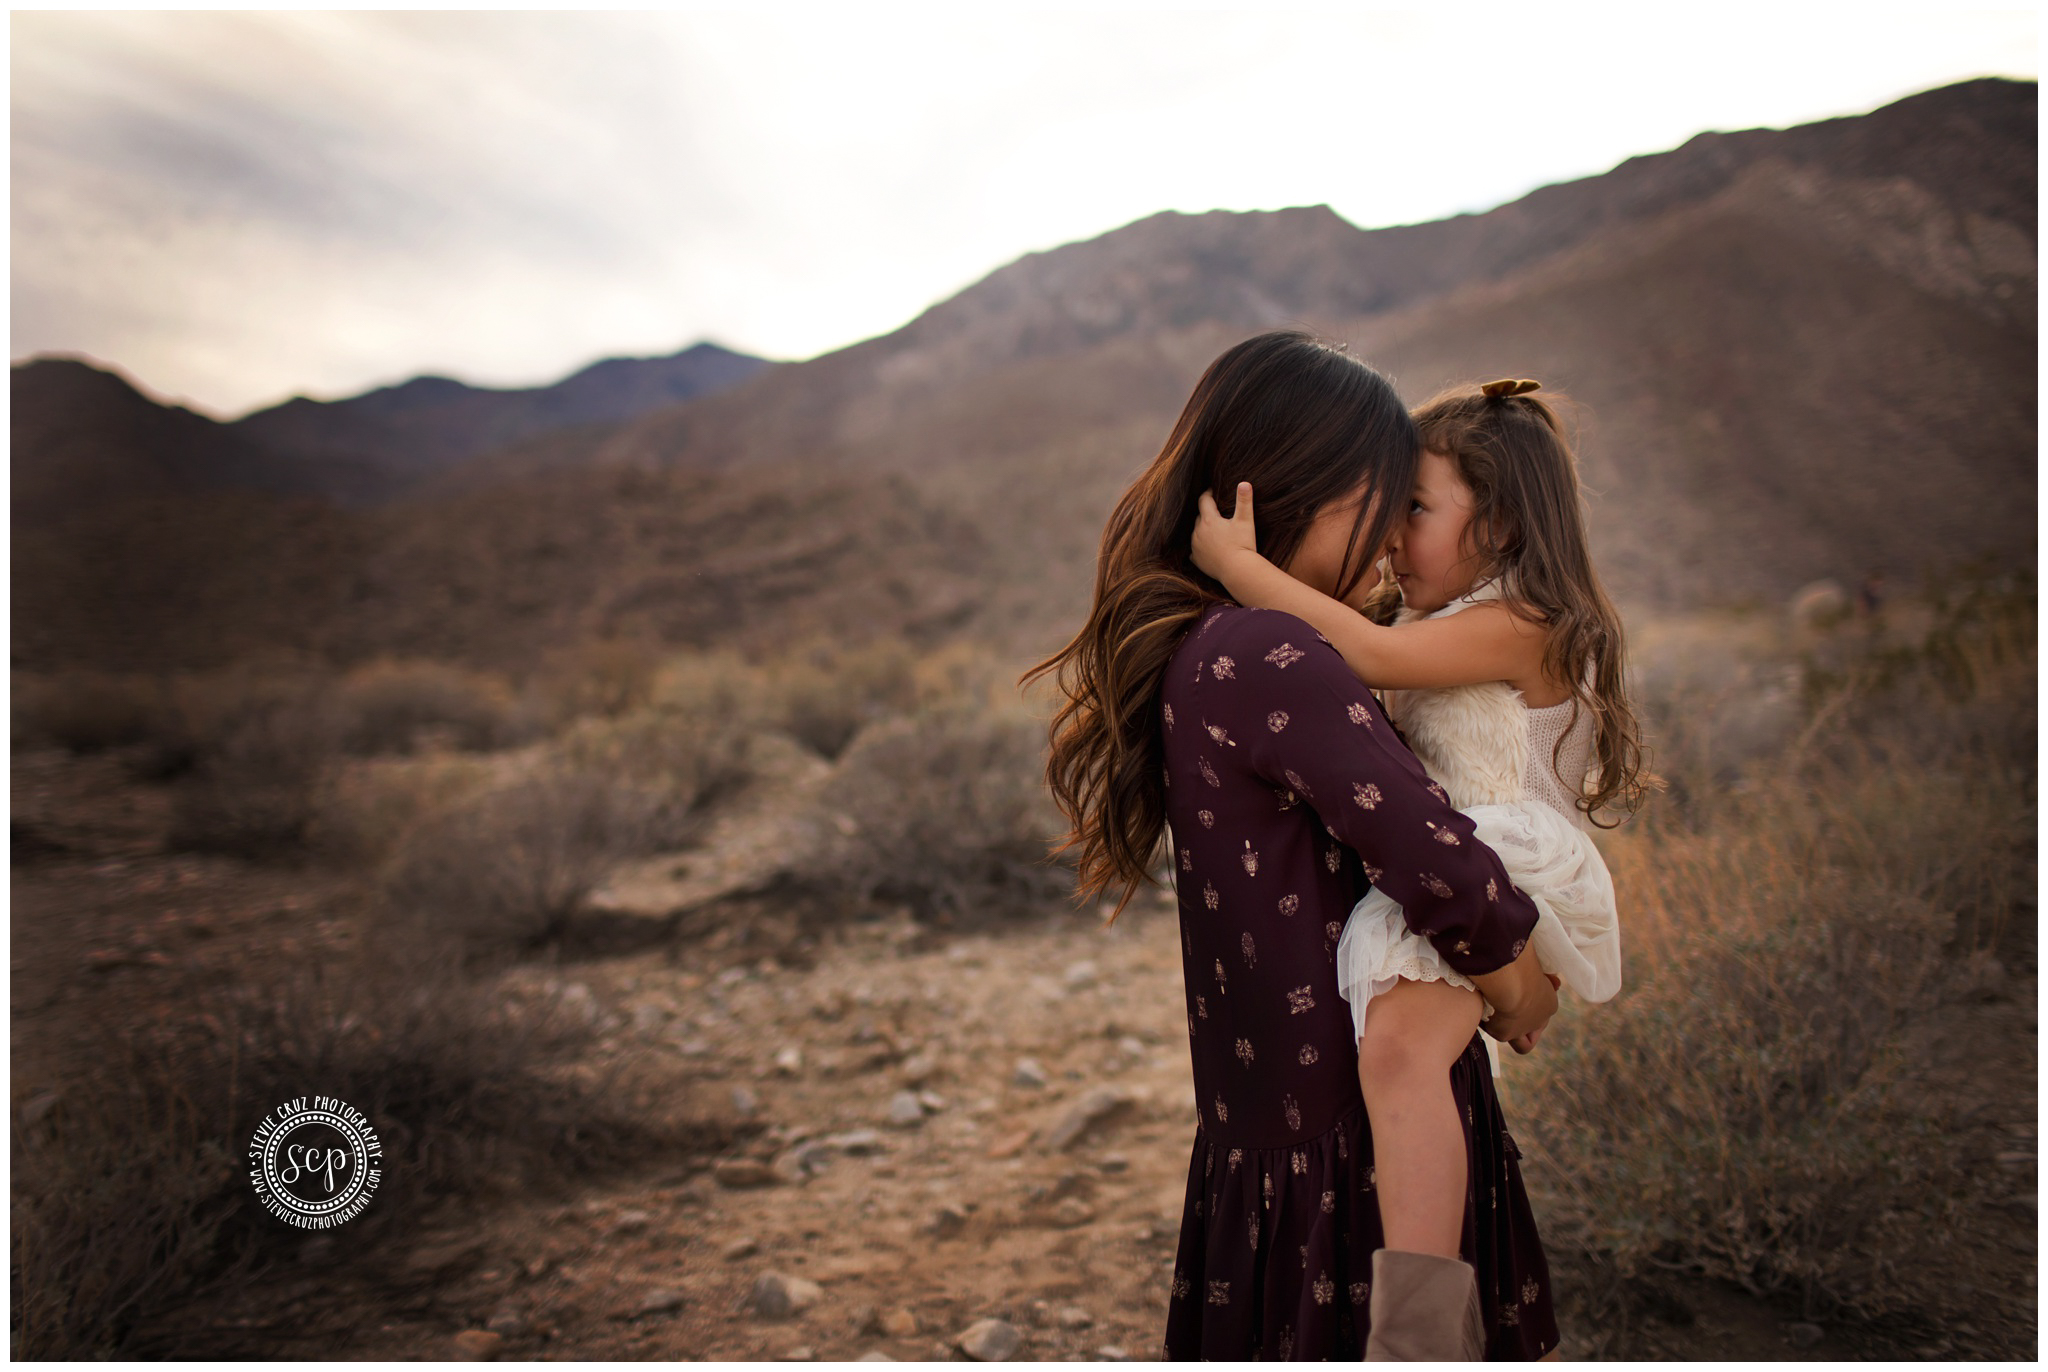 Fun photo between mom and daughter during her family portrait session in Palm Desert